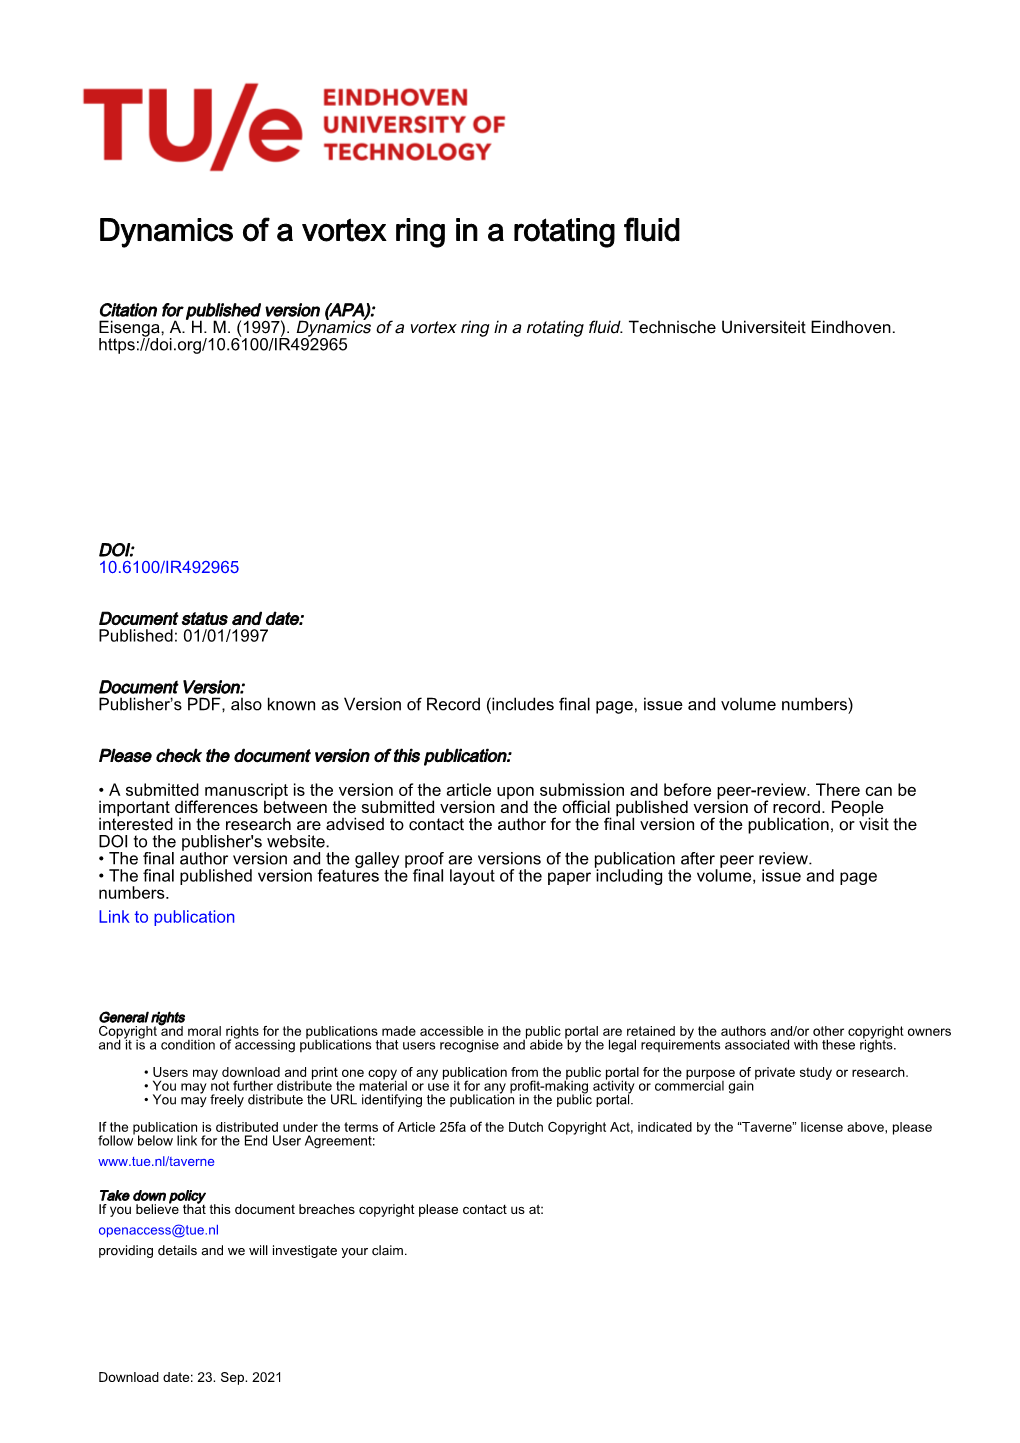 Dynamics of a Vortex Ring in a Rotating Fluid